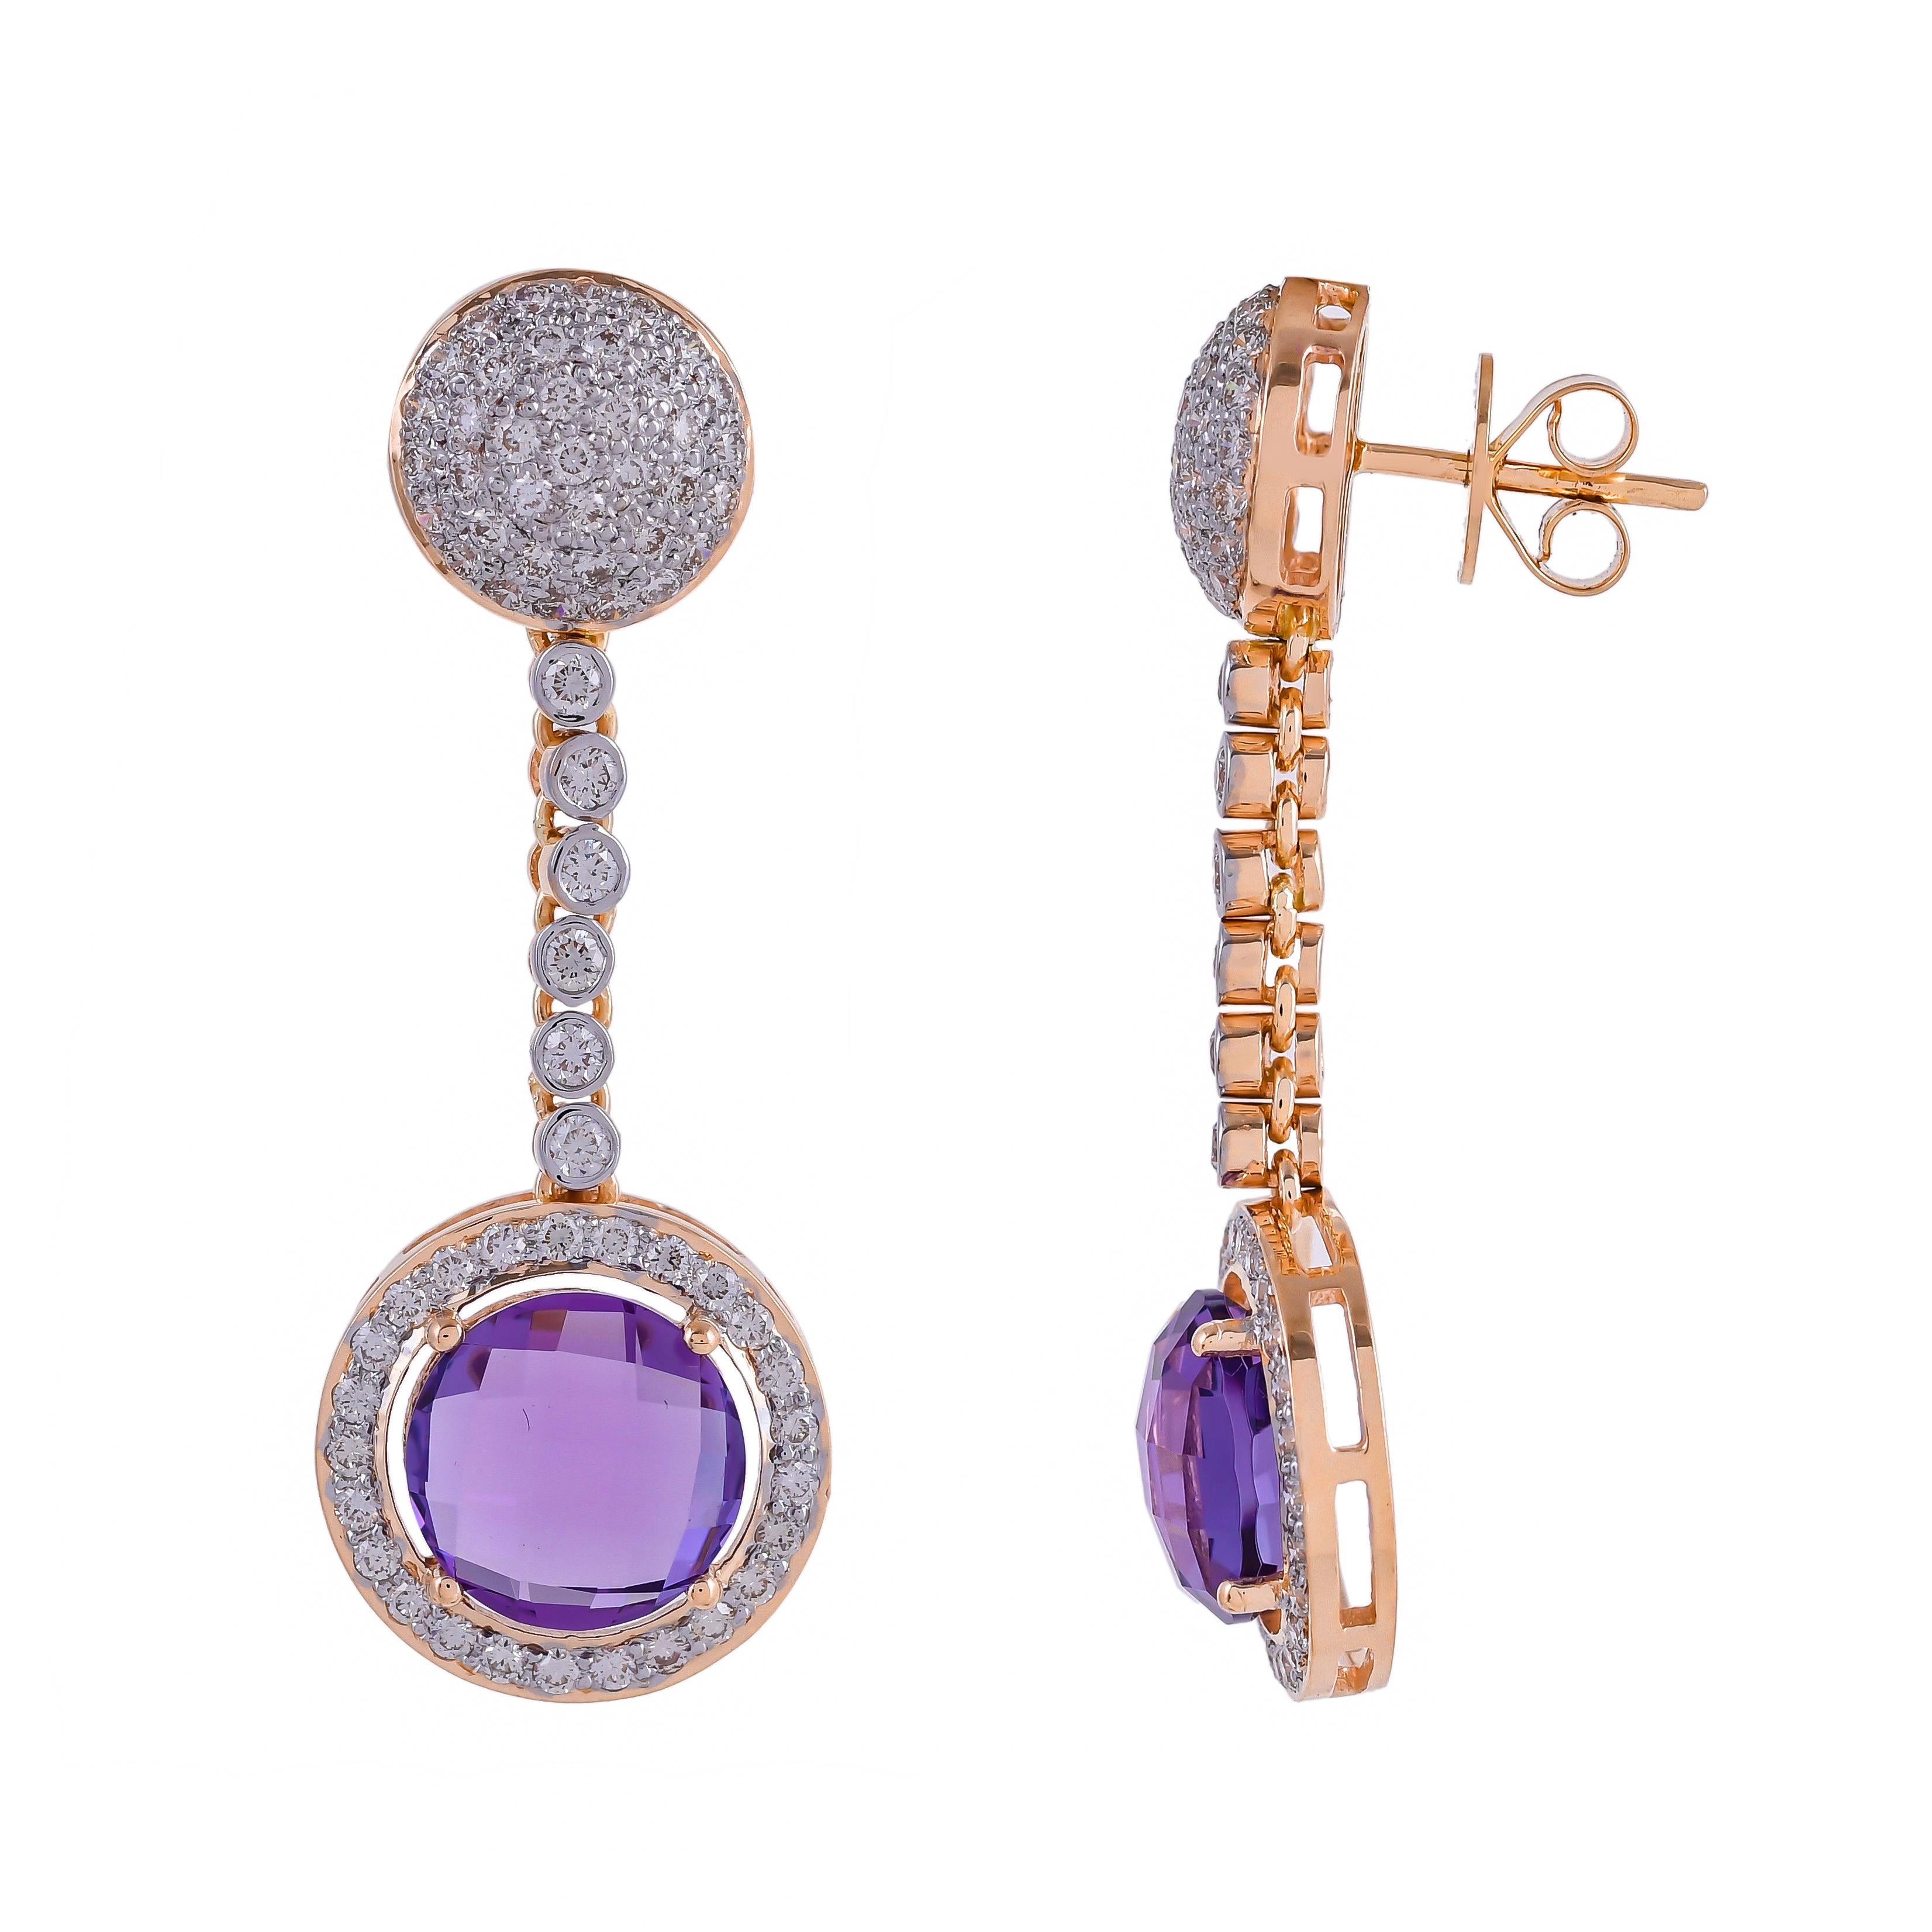 These gorgeous earrings from the collection 'Carnival' mounted in 18 karats yellow gold features round-shaped 6.72 carats amethyst in the centre, accompanied by 1.91 carats diamonds. Modern style with classic elegance.
Art of gifting: the Jewel is